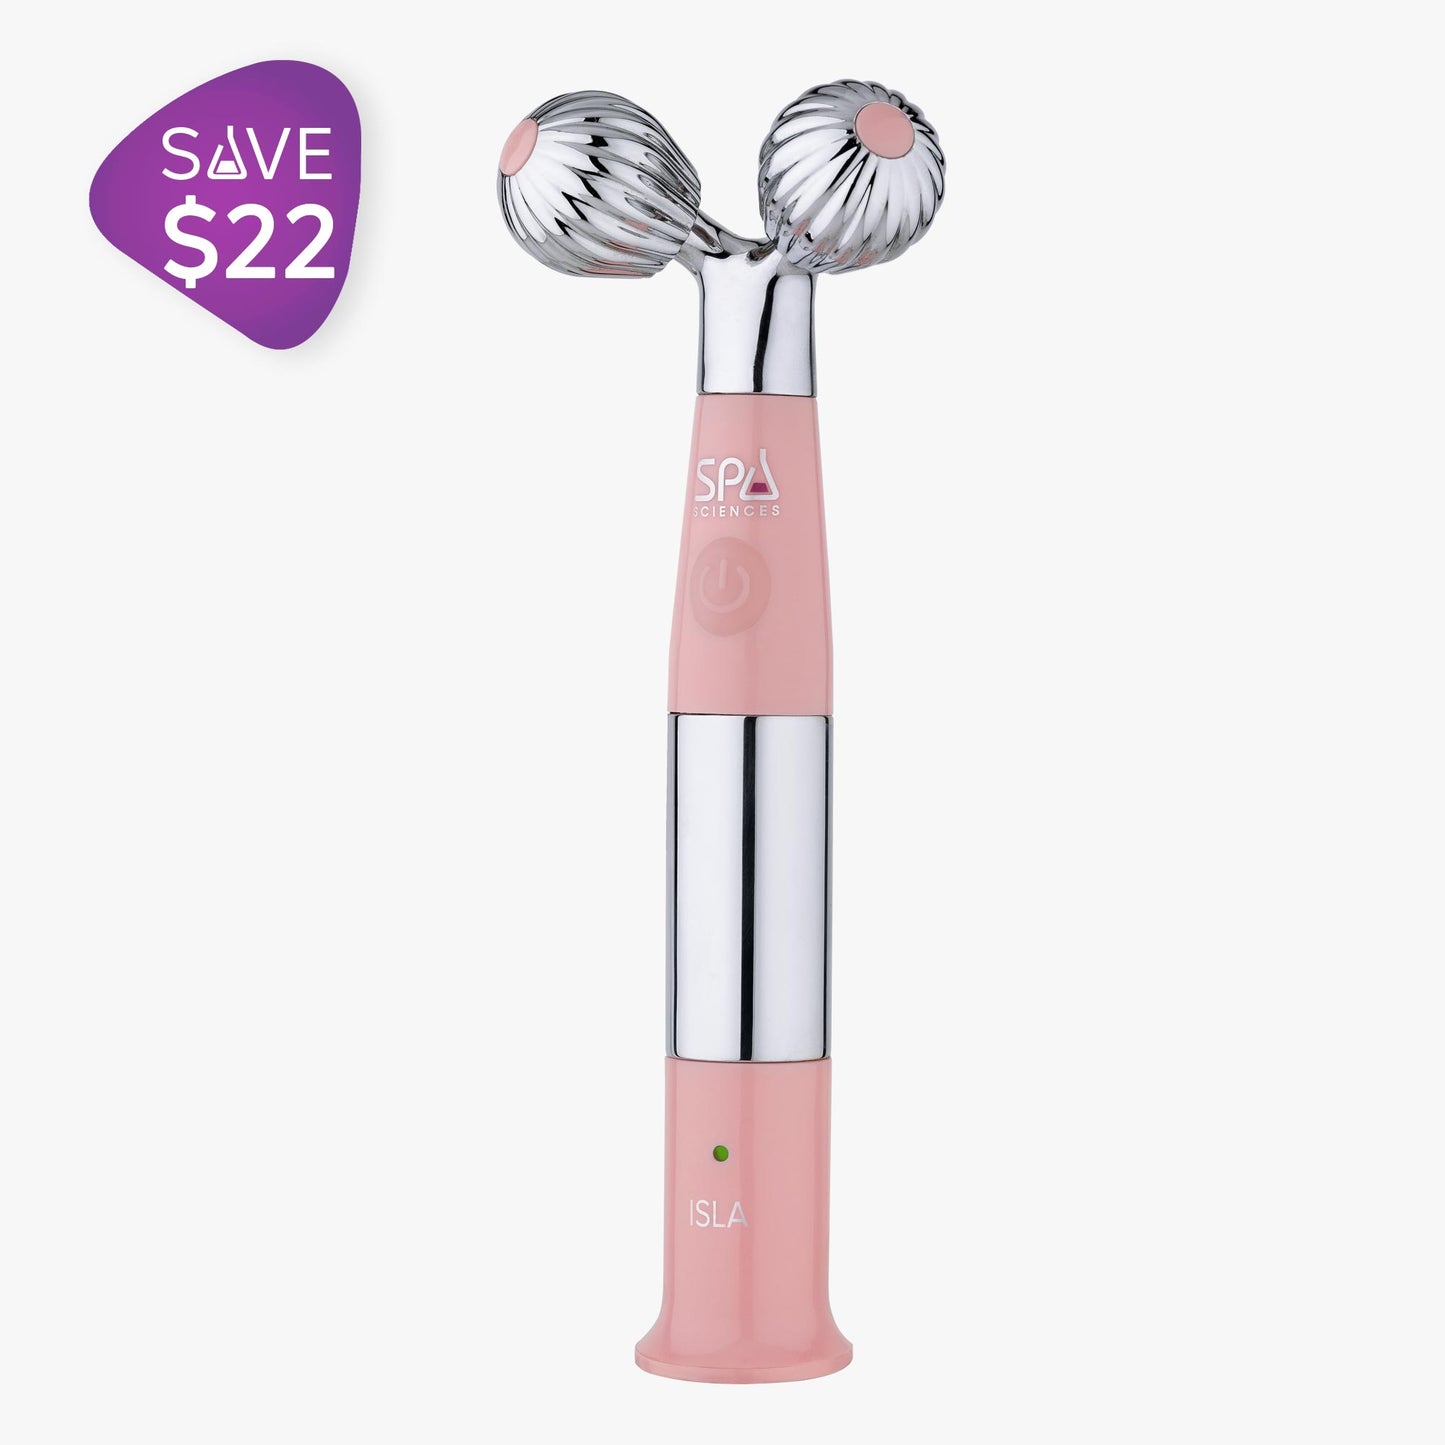 A pink and silver Spa Sciences Contour & Glow electric facial massager with a tag price of $22.